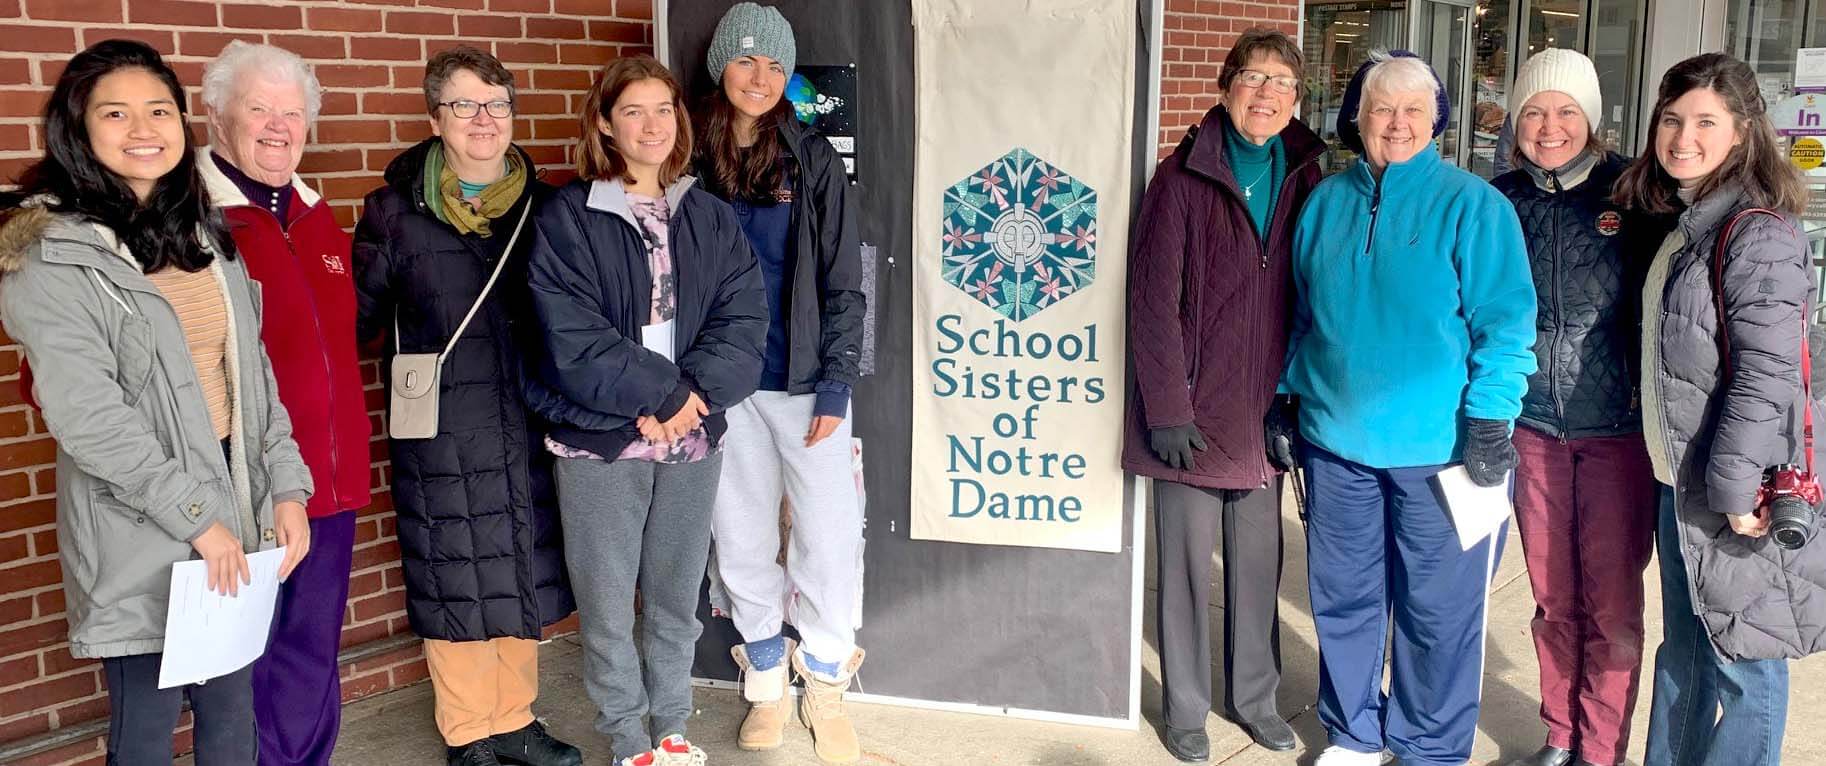 NDP joins School Sisters of Notre Dame in nudging shoppers to help environment